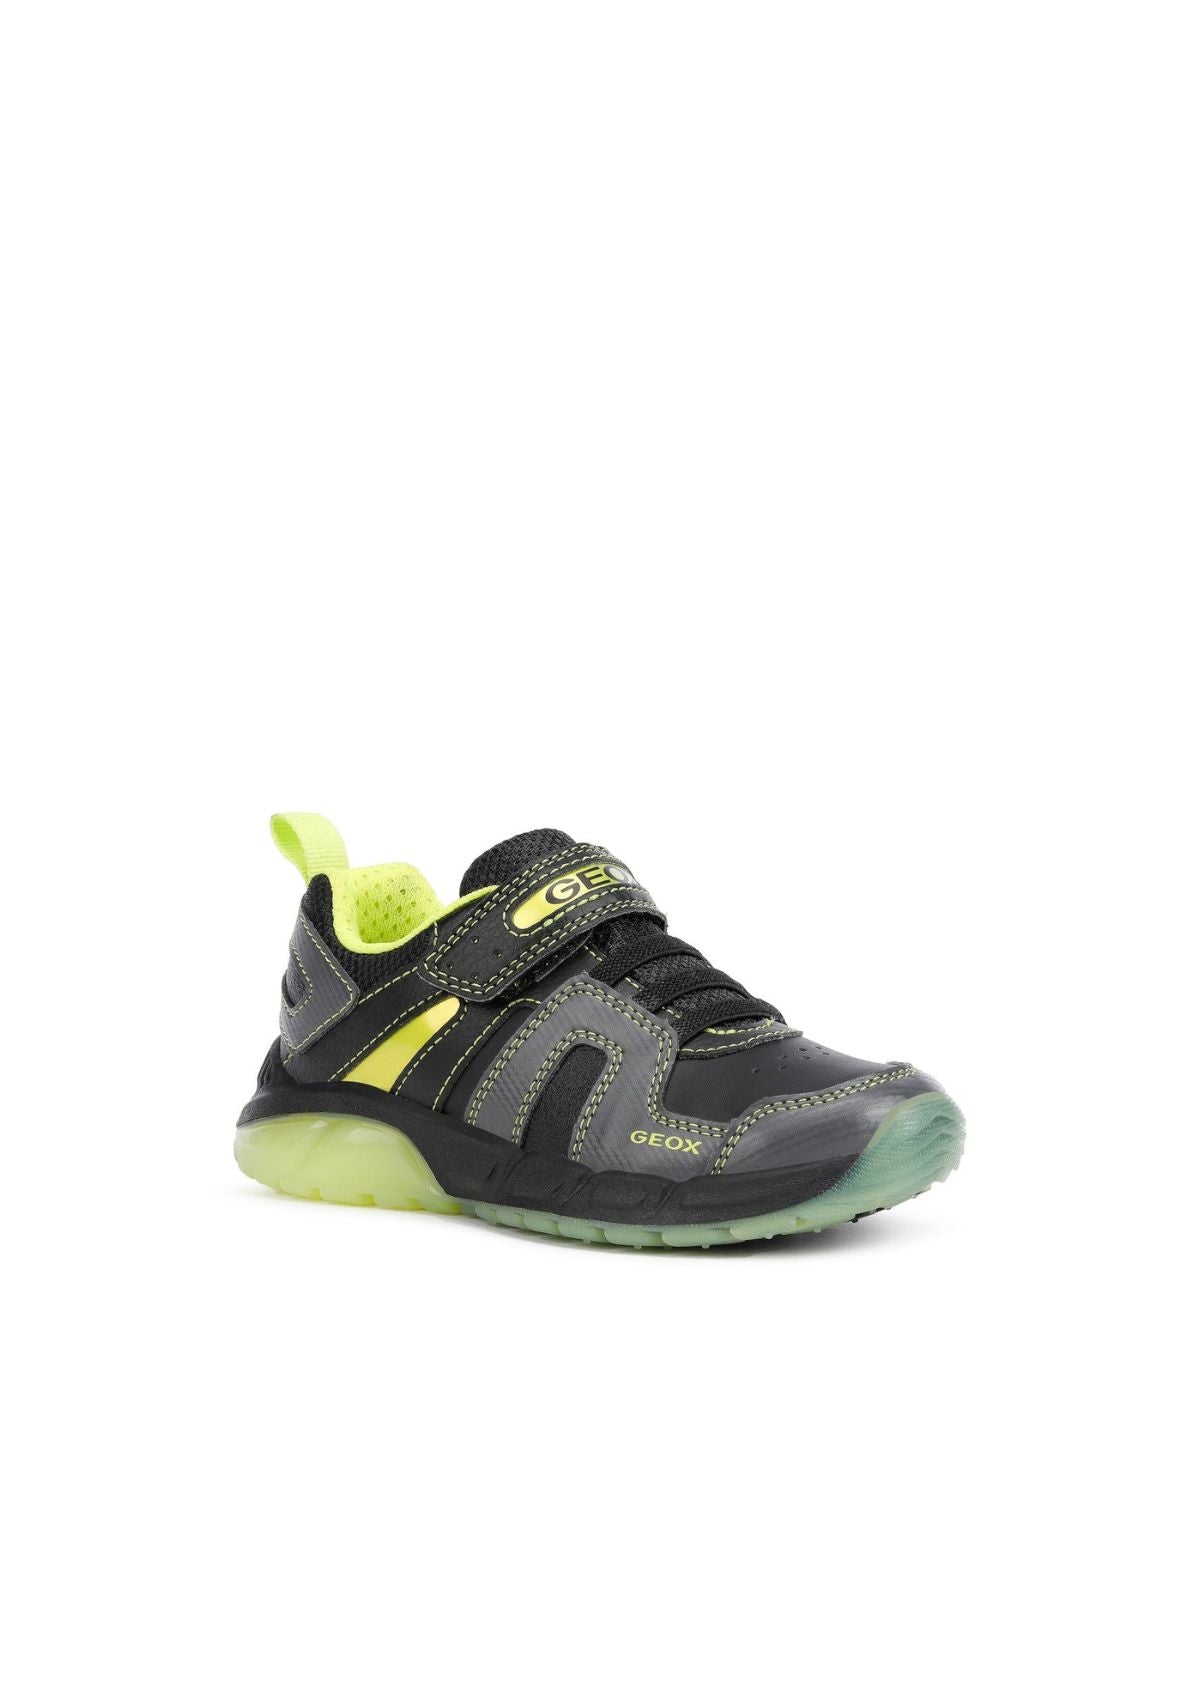 Geox Boys SPAZIALE Black Lime side front